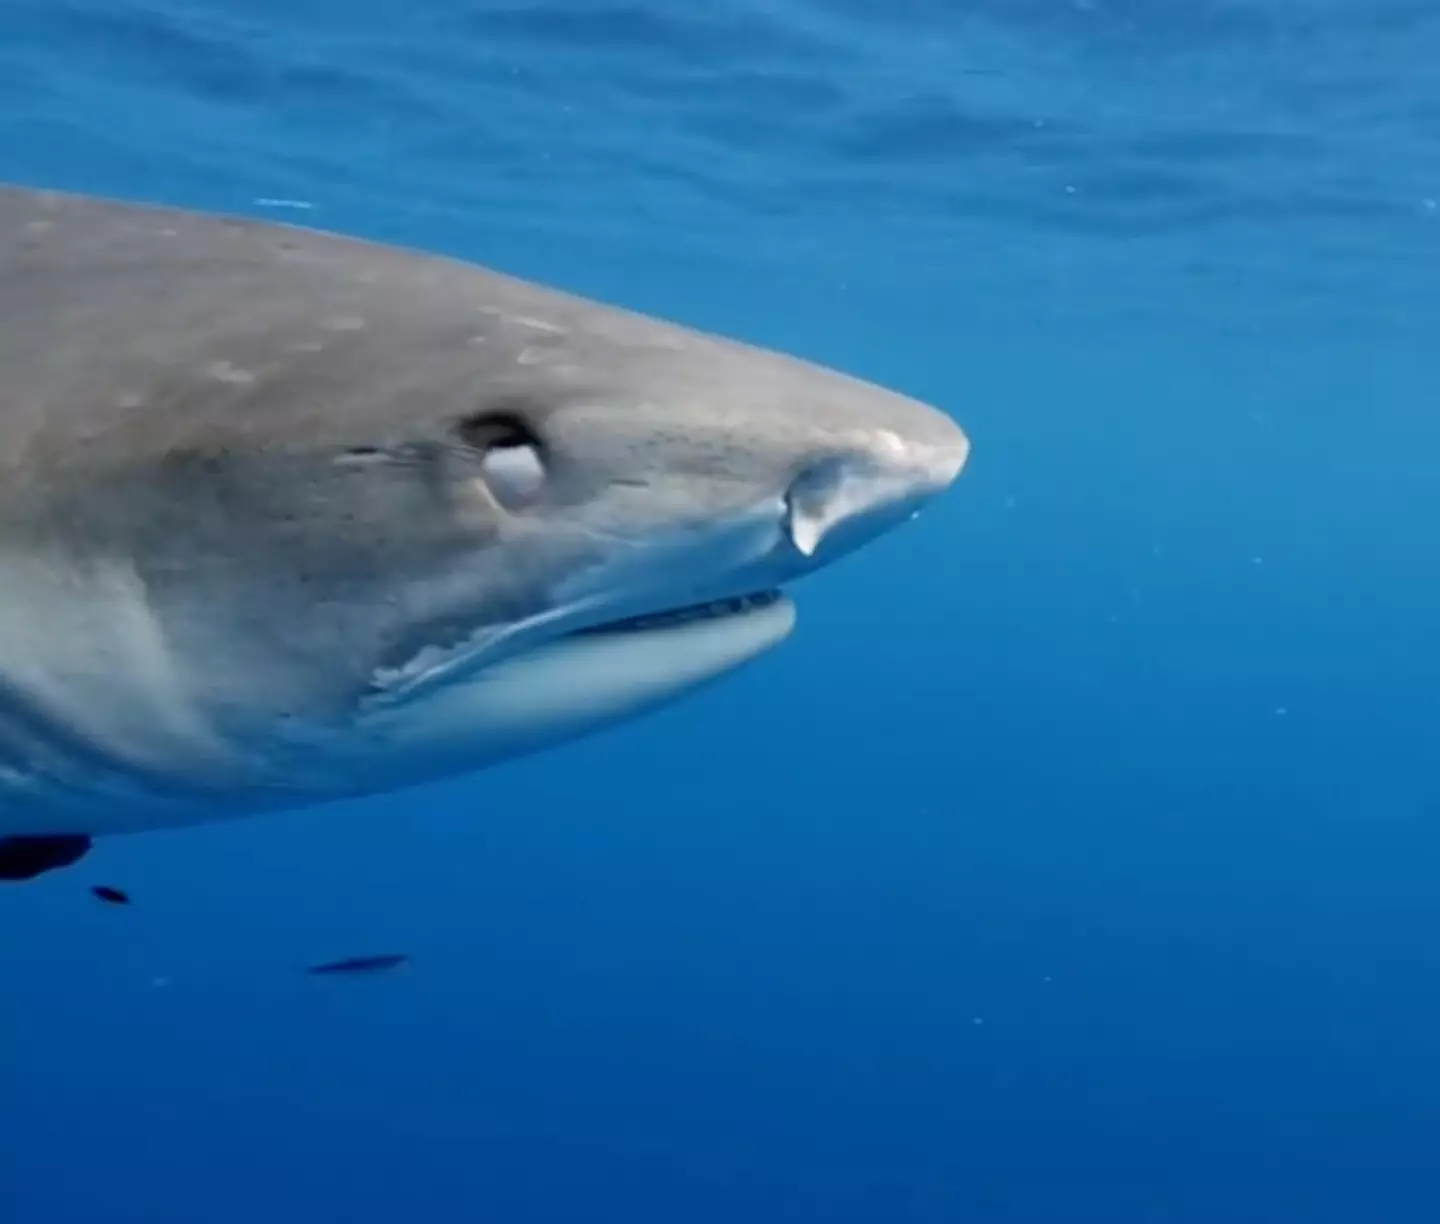 A shark blinking or showing the white of their eyes doesn't mean they're about to attack.